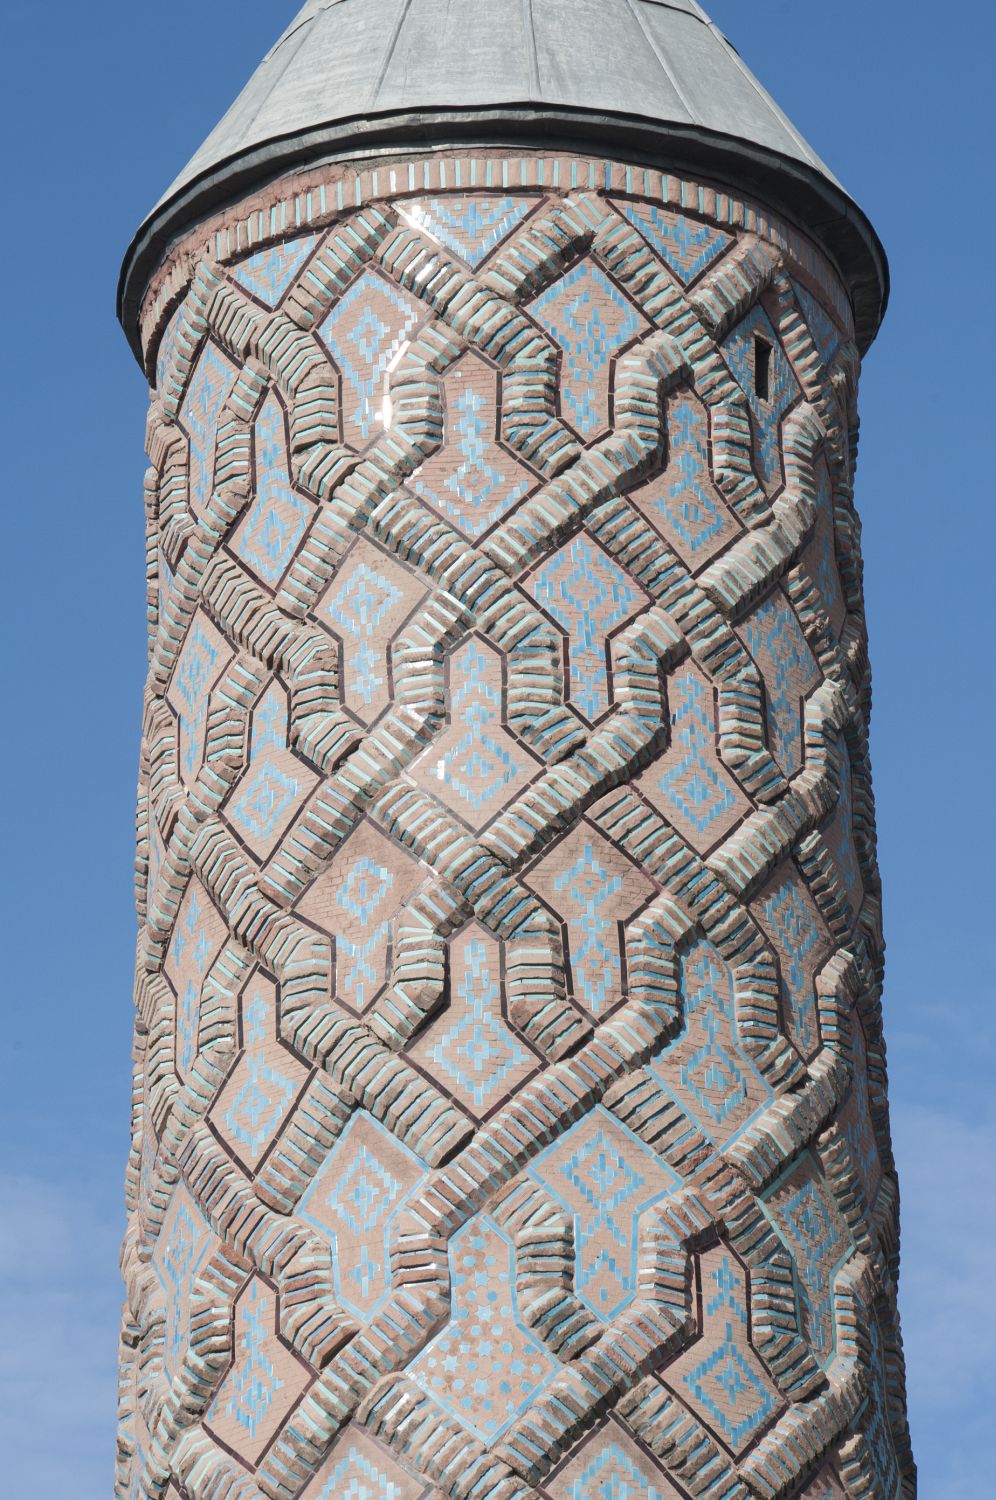 Detail view of minaret showing strapwork ornament in brick.